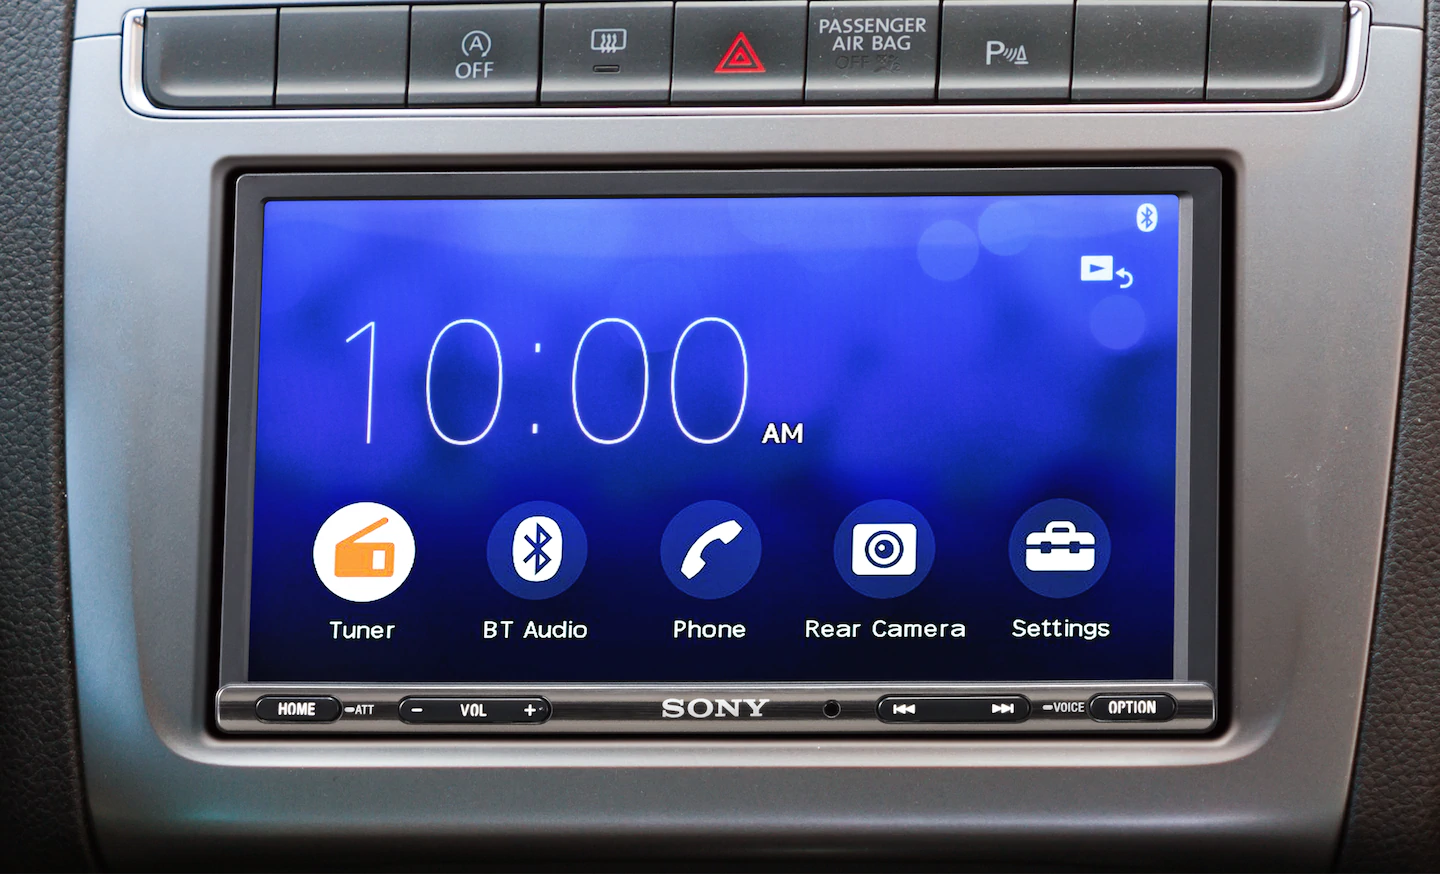 Sony launches its latest in-car AV receivers with large displays